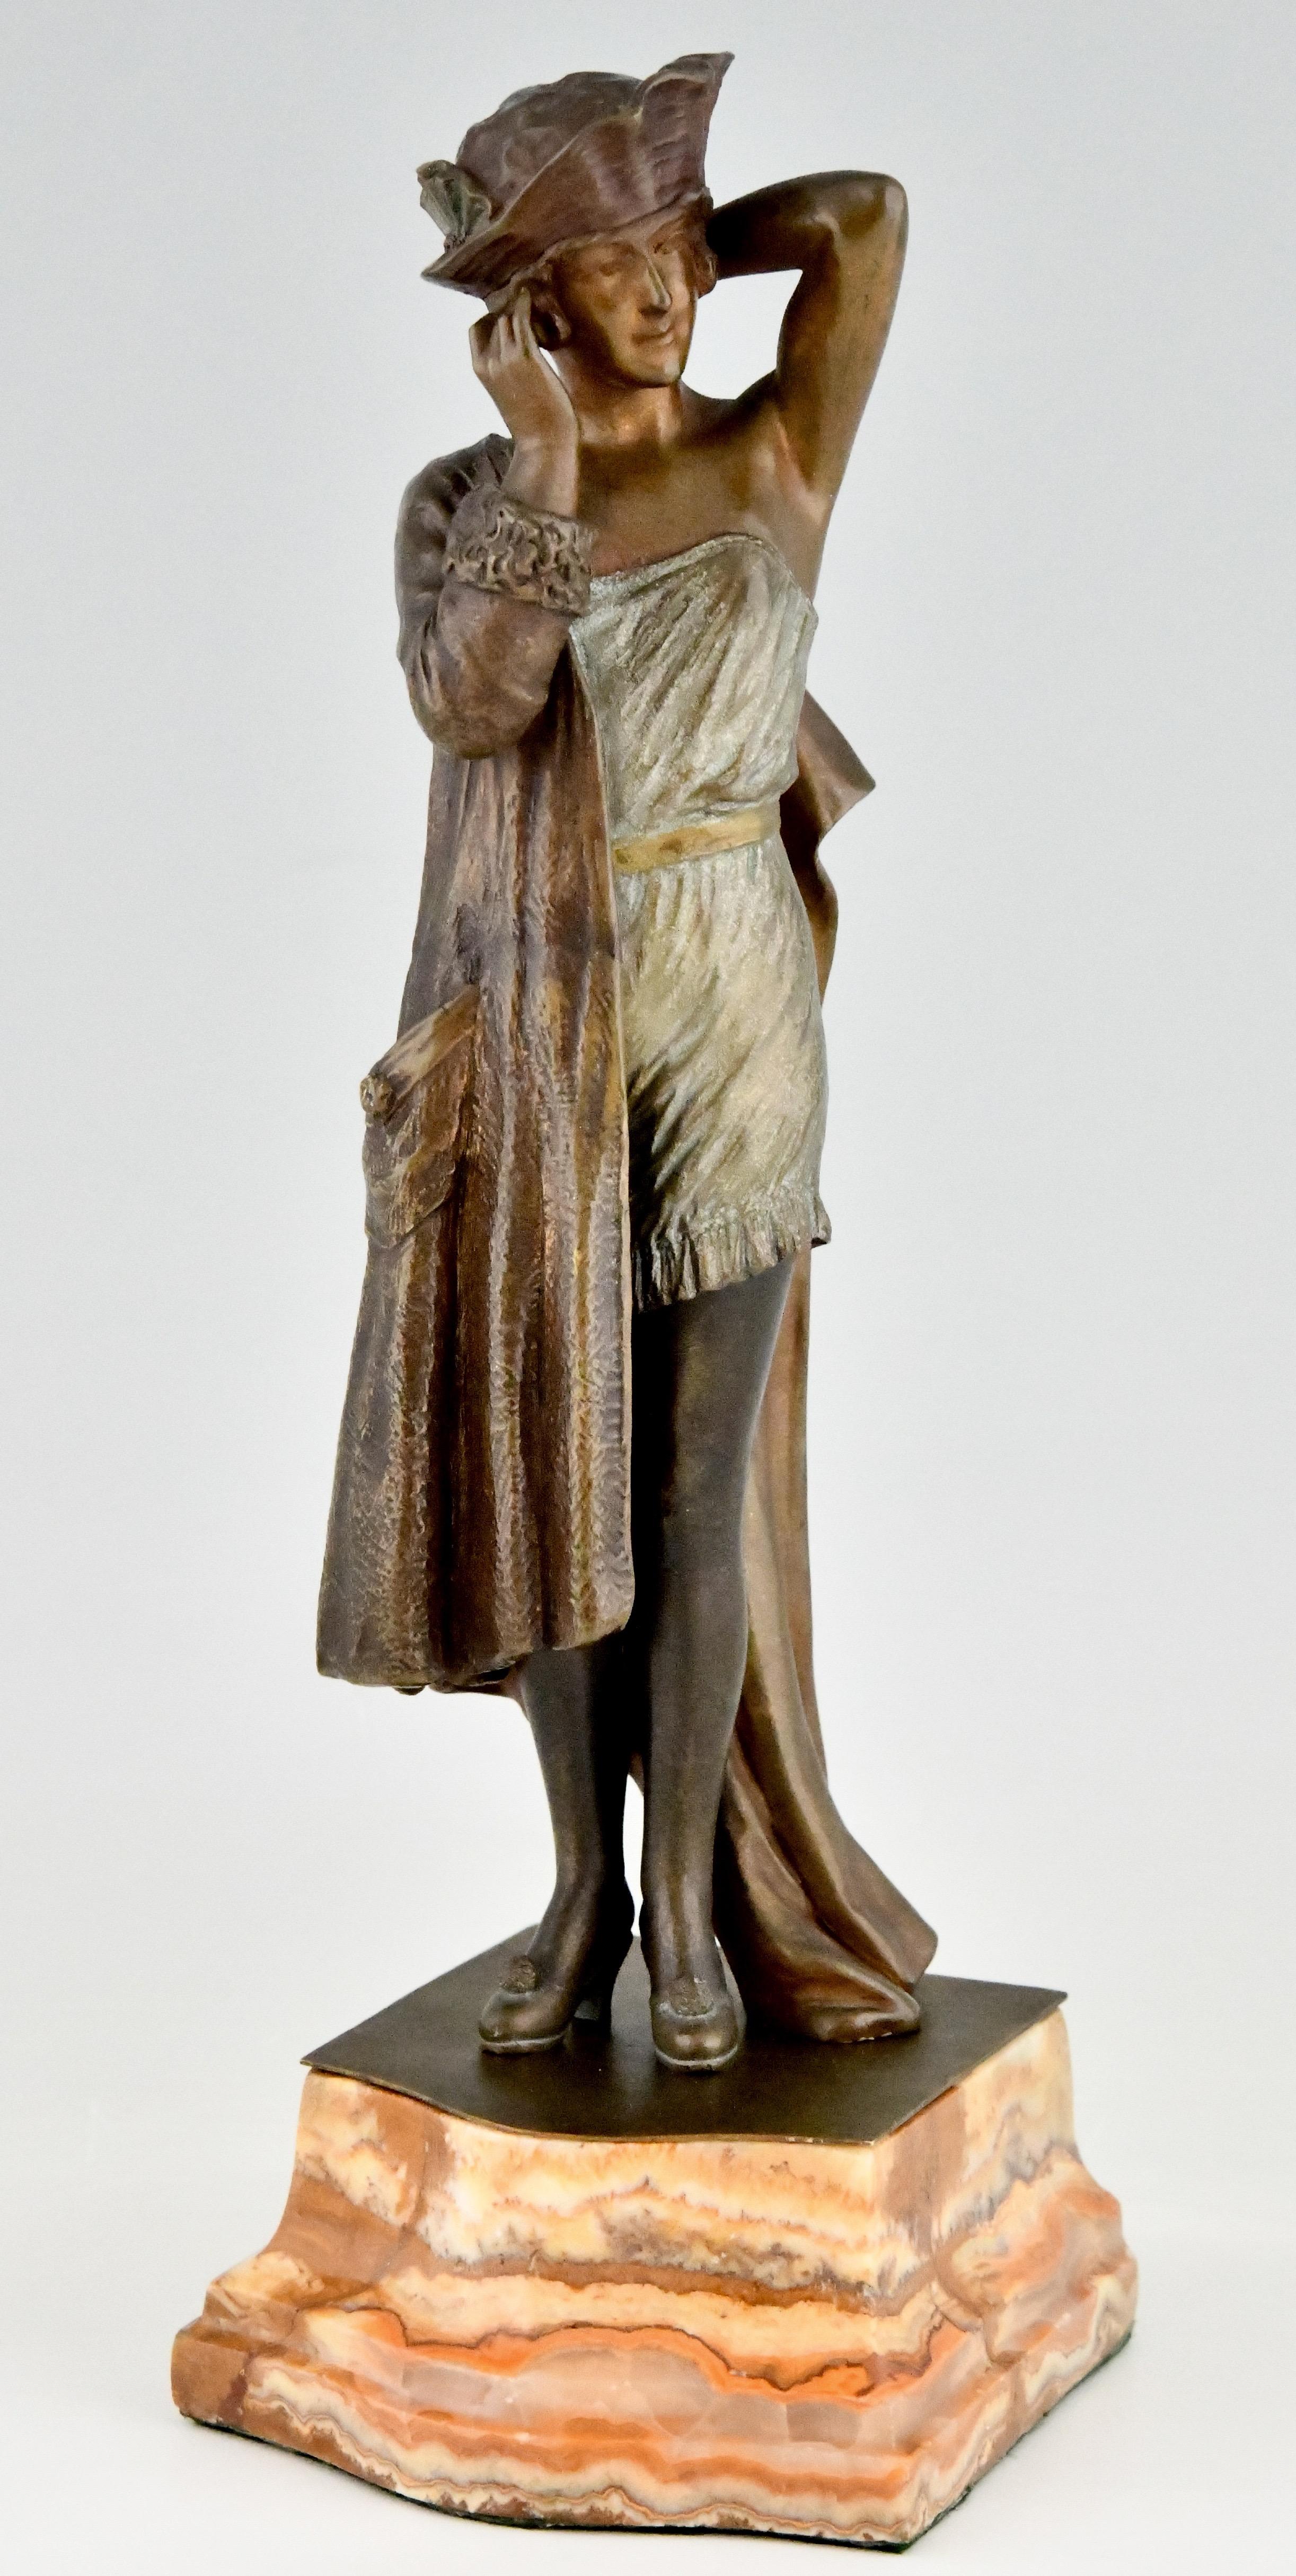 Art Deco bronze sculpture of a lady in underwear and dressing gown trying on a hat. Coquetterie Matinale. Morning coquetry by Joanny Durand, France 1886-1952. Patinated bronze on a marble base.
Literature:
The dictionary of sculptors in bronze,